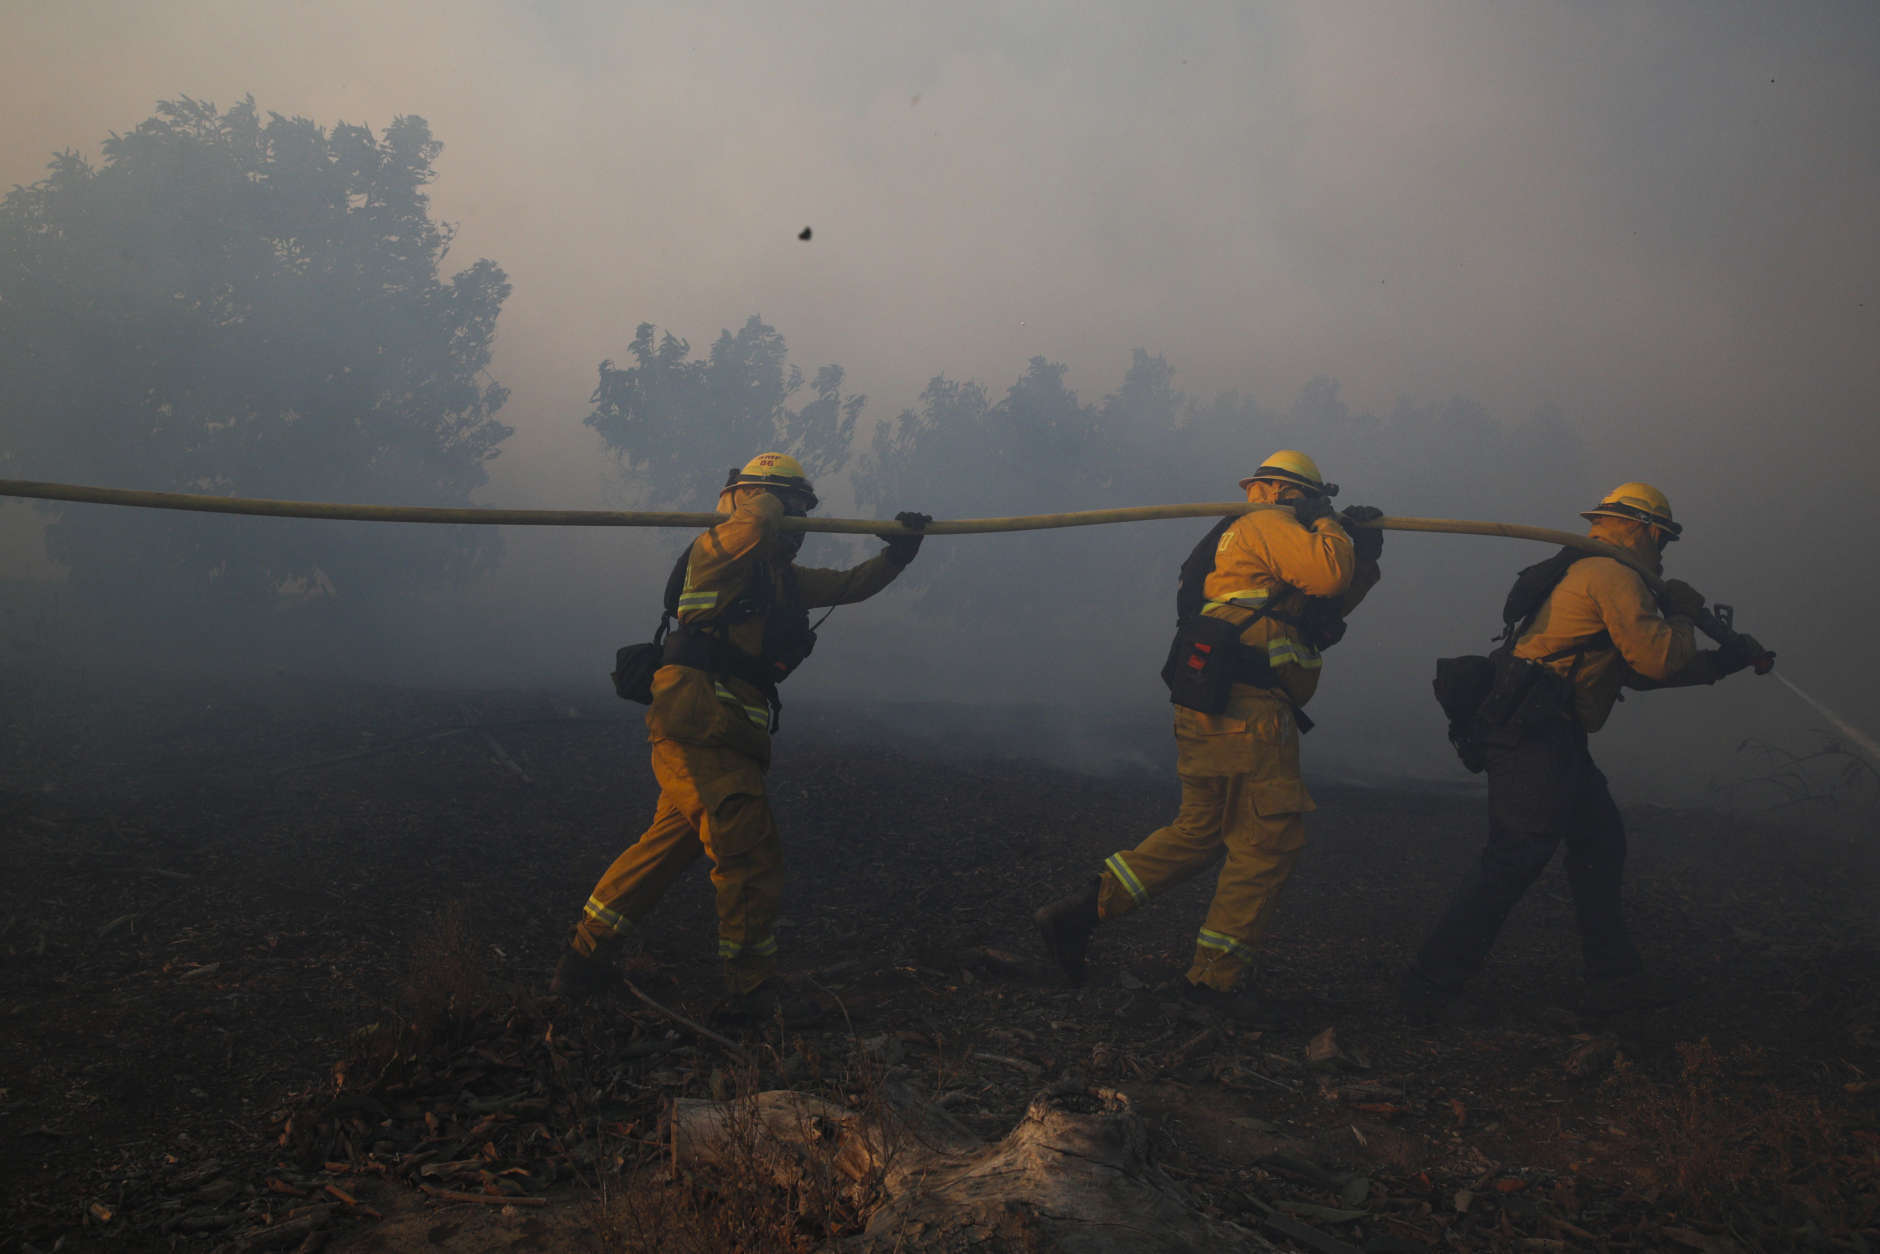 Firefighters put out a wildfire burning in an orchard Tuesday, Dec. 5, 2017, in Santa Paula, Calif. Raked by ferocious Santa Ana winds, explosive wildfires northwest of Los Angeles and in the city's foothills burned a psychiatric hospital and scores of homes and other structures Tuesday and forced the evacuation of tens of thousands of people. (AP Photo/Jae C. Hong)